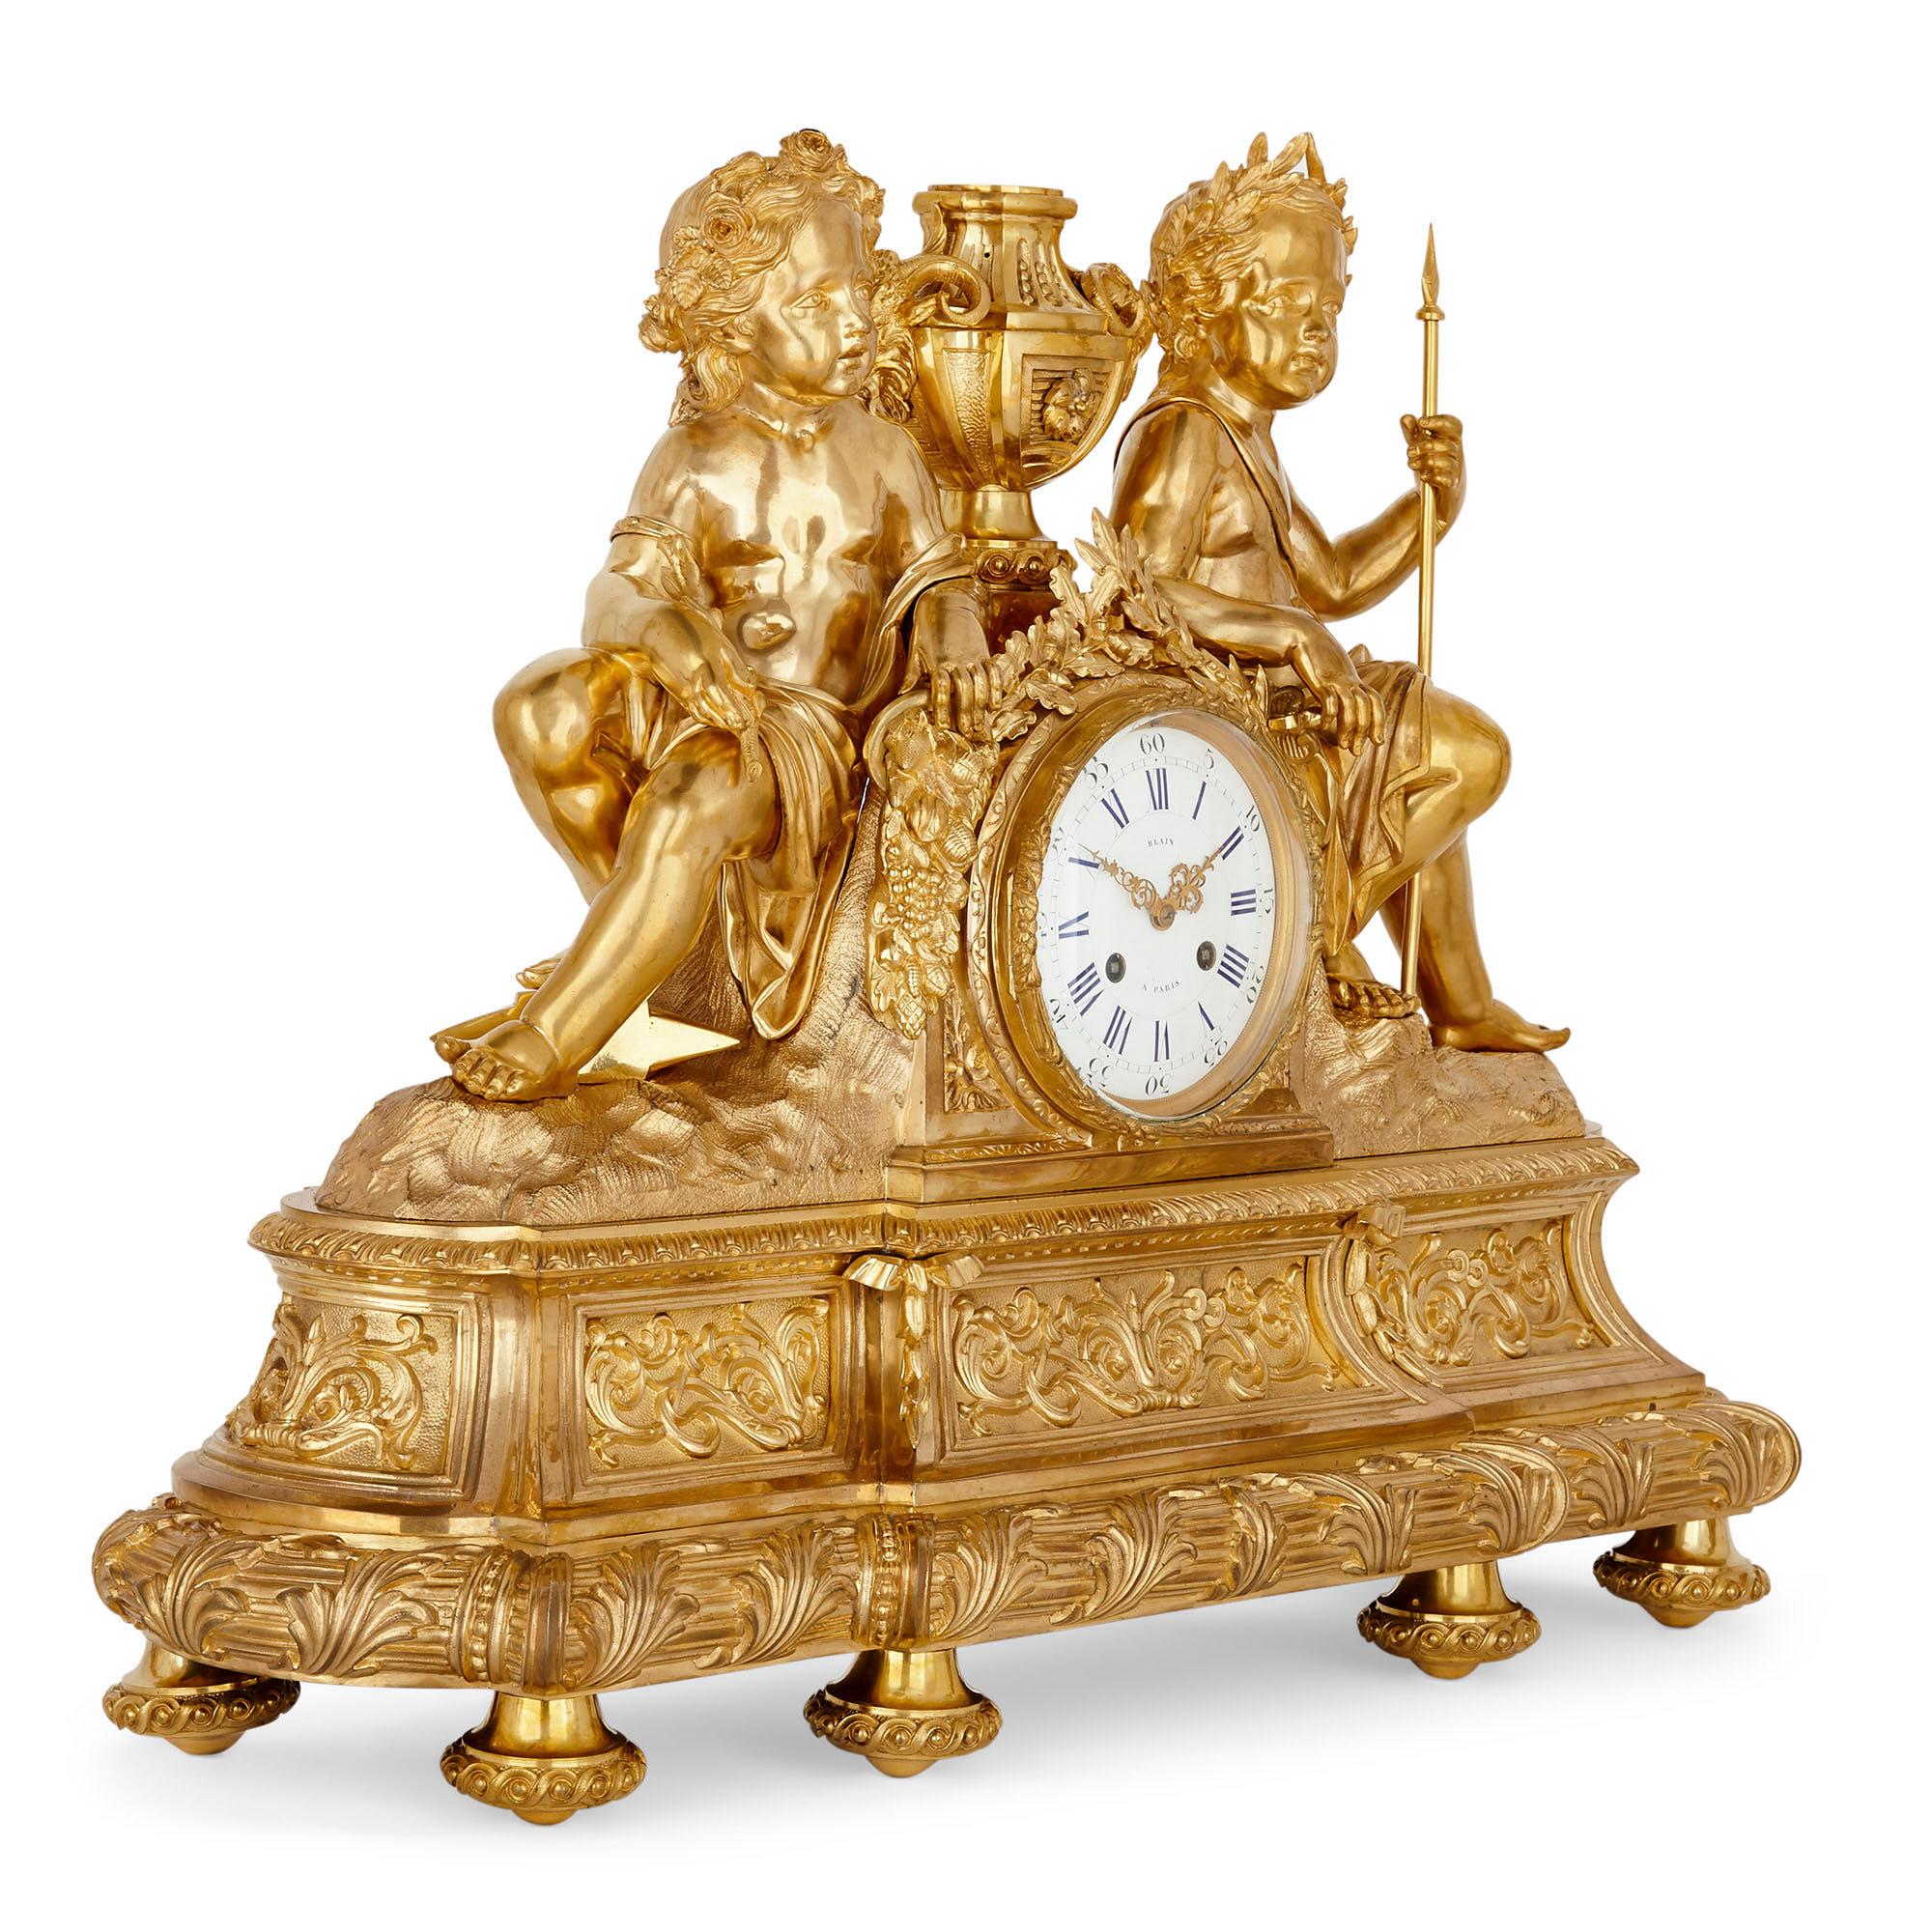 Antique neoclassical style three-piece gilt bronze clock set
French, late 19th century
Measures: Clock: Height 57cm, width 74cm, depth 23cm.
Candelabra: Height 83cm, width 27cm, depth 17cm

This fine clock set is comprised of a central mantel